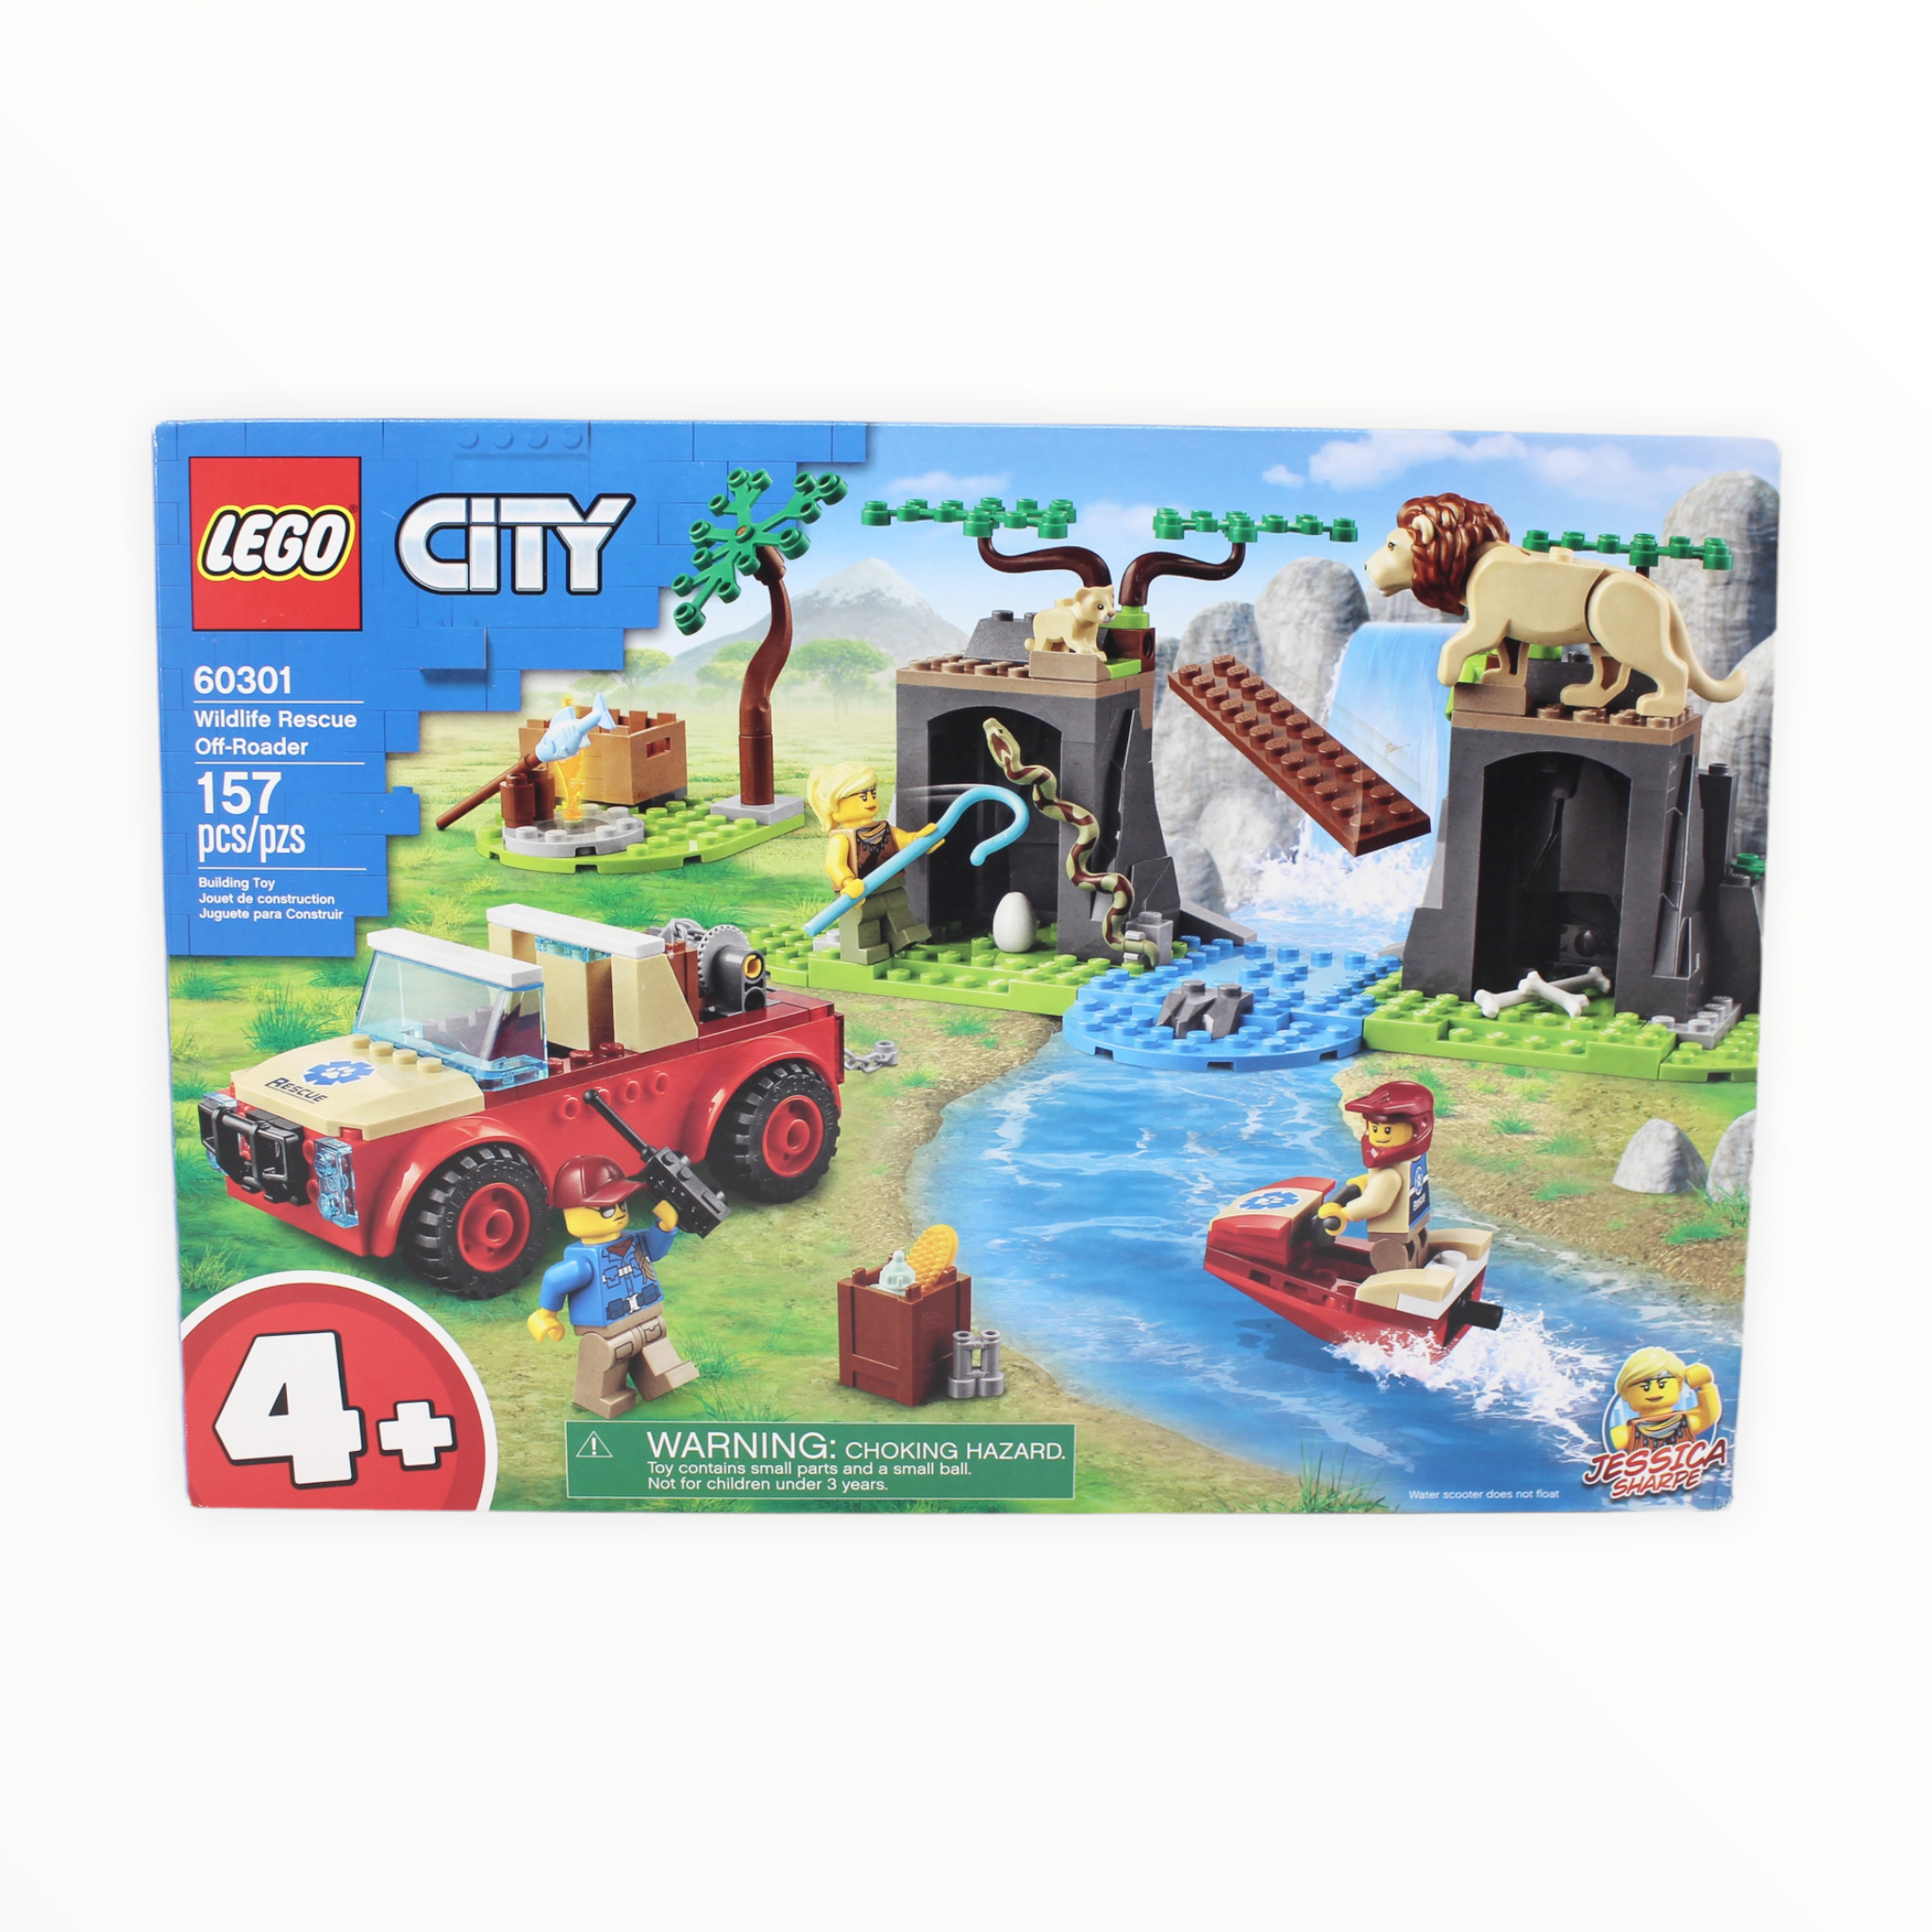 Certified Used Set 60301 City Wildlife Rescue Off-Roader